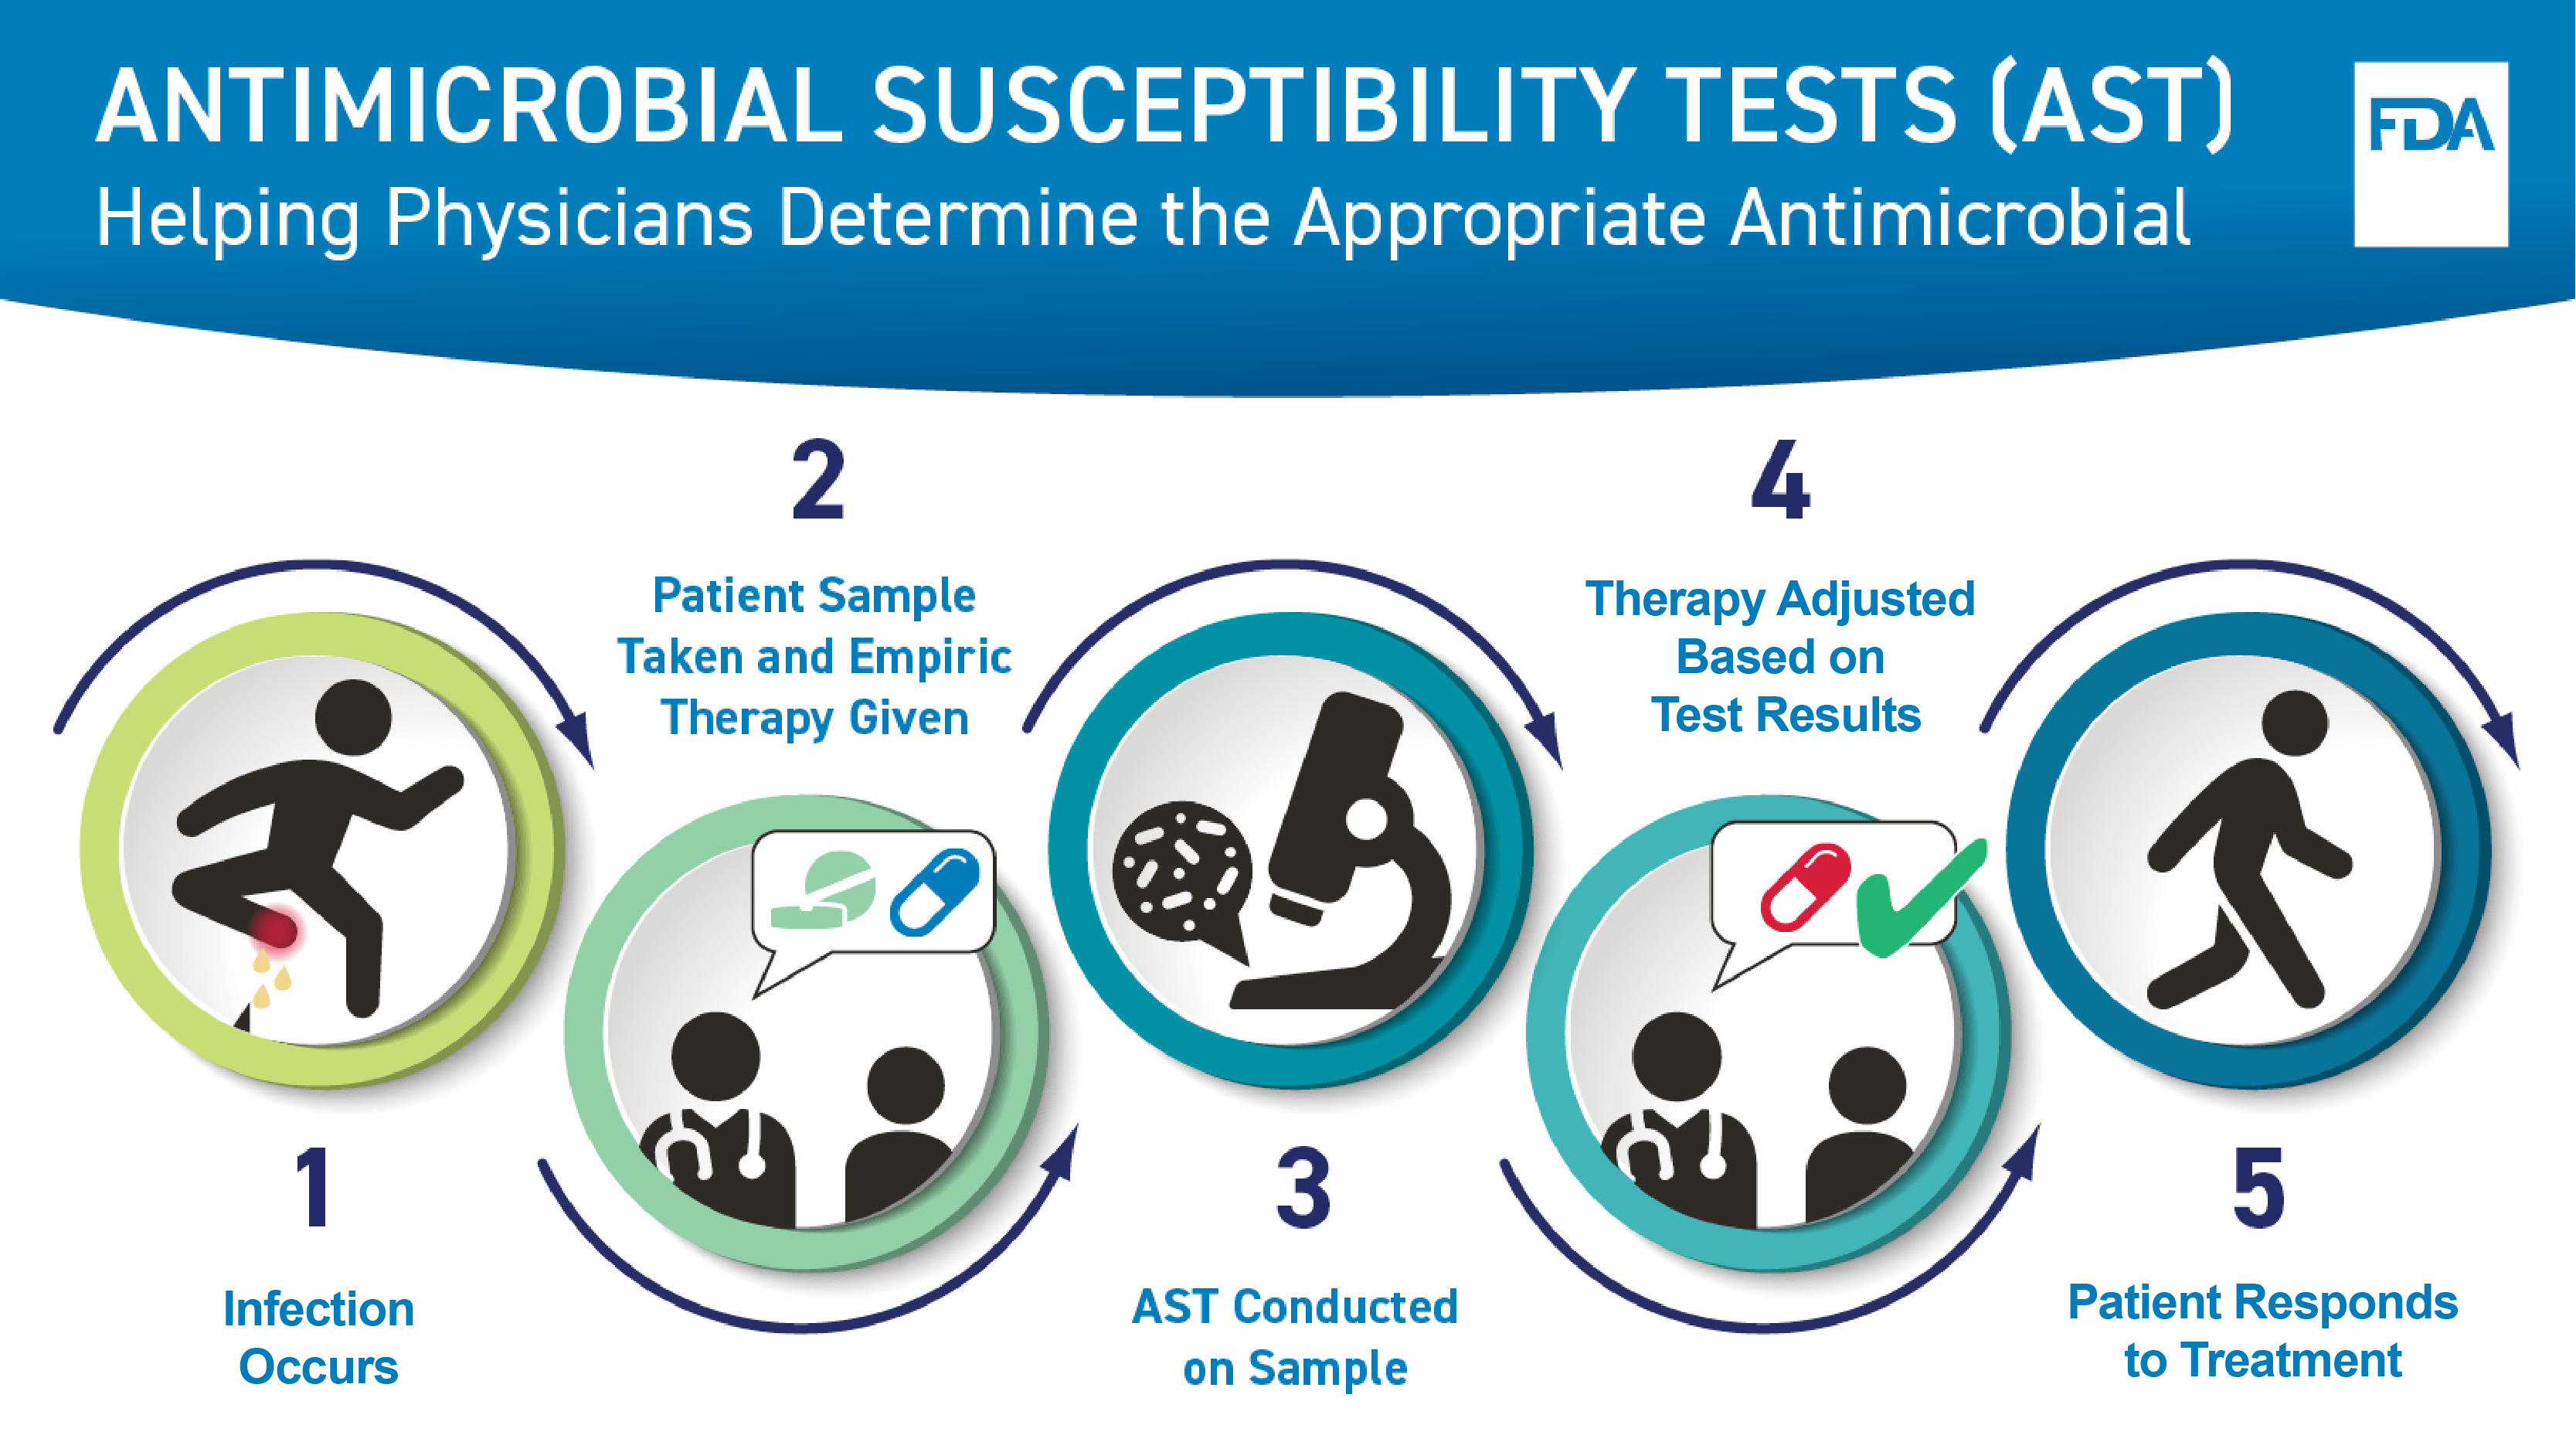 This graphic shows how an antimicrobial susceptibility test, or AST, helps a health care professional determine the correct drug to treat a bacterial infection. First, an infection occurs. Next, a patient sample is taken for testing and an empiric therapy is provided to the patient. Third, an AST is conducted on the sample. Next, the treatment is adjusted based on the test results, as needed, to ensure the most appropriate therapy, or drug, is given. Last, the patient responds to treatment.